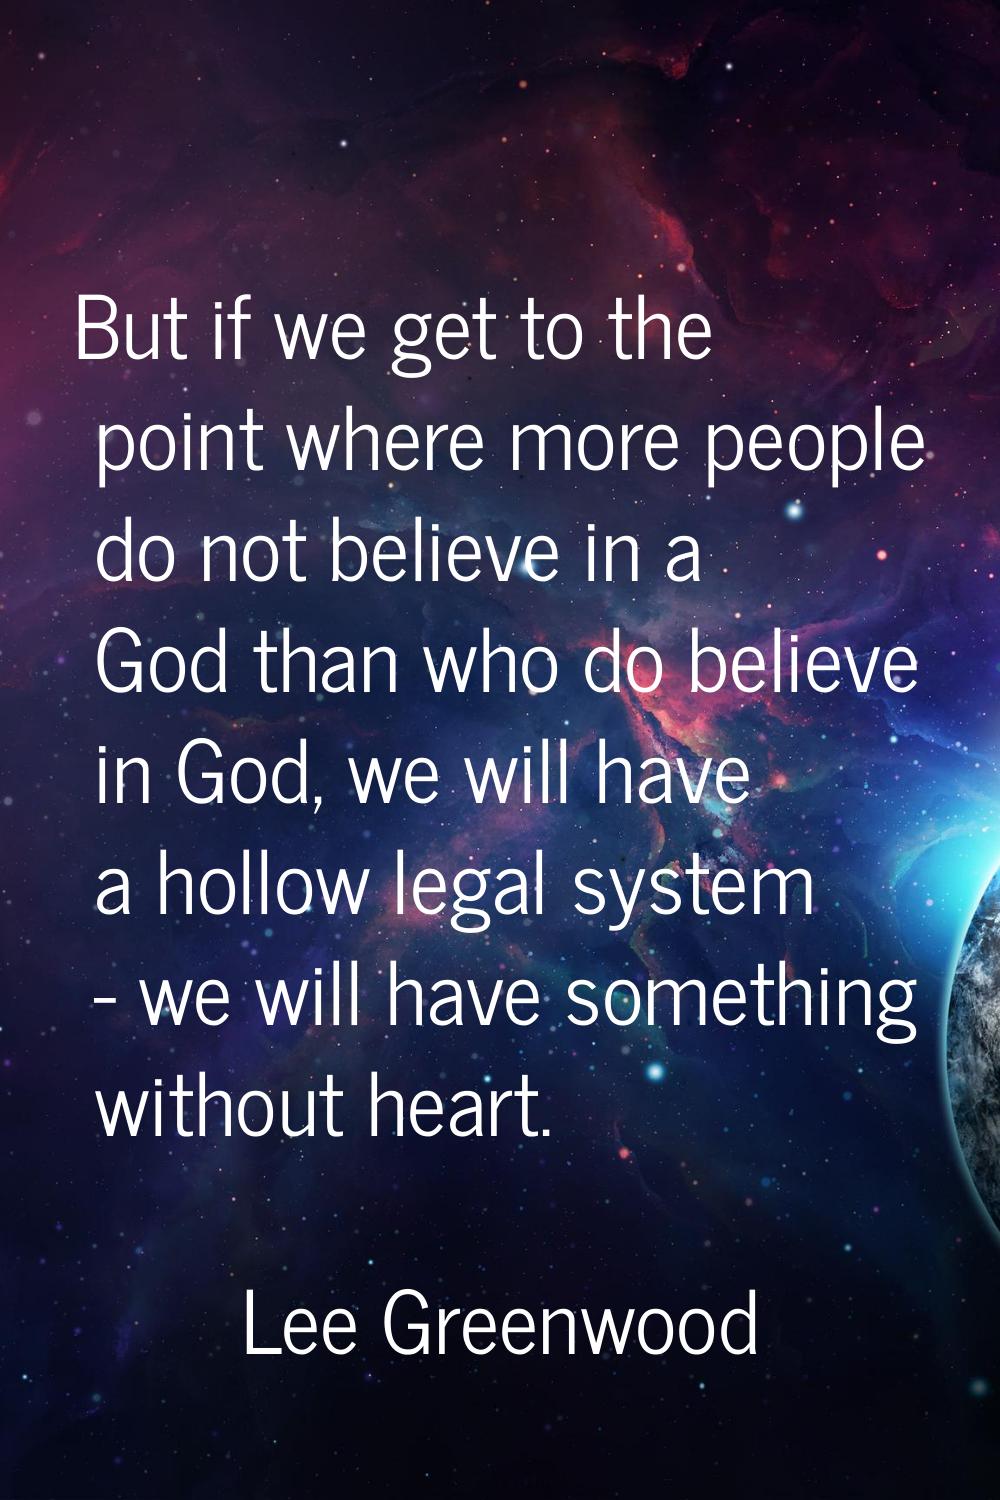 But if we get to the point where more people do not believe in a God than who do believe in God, we